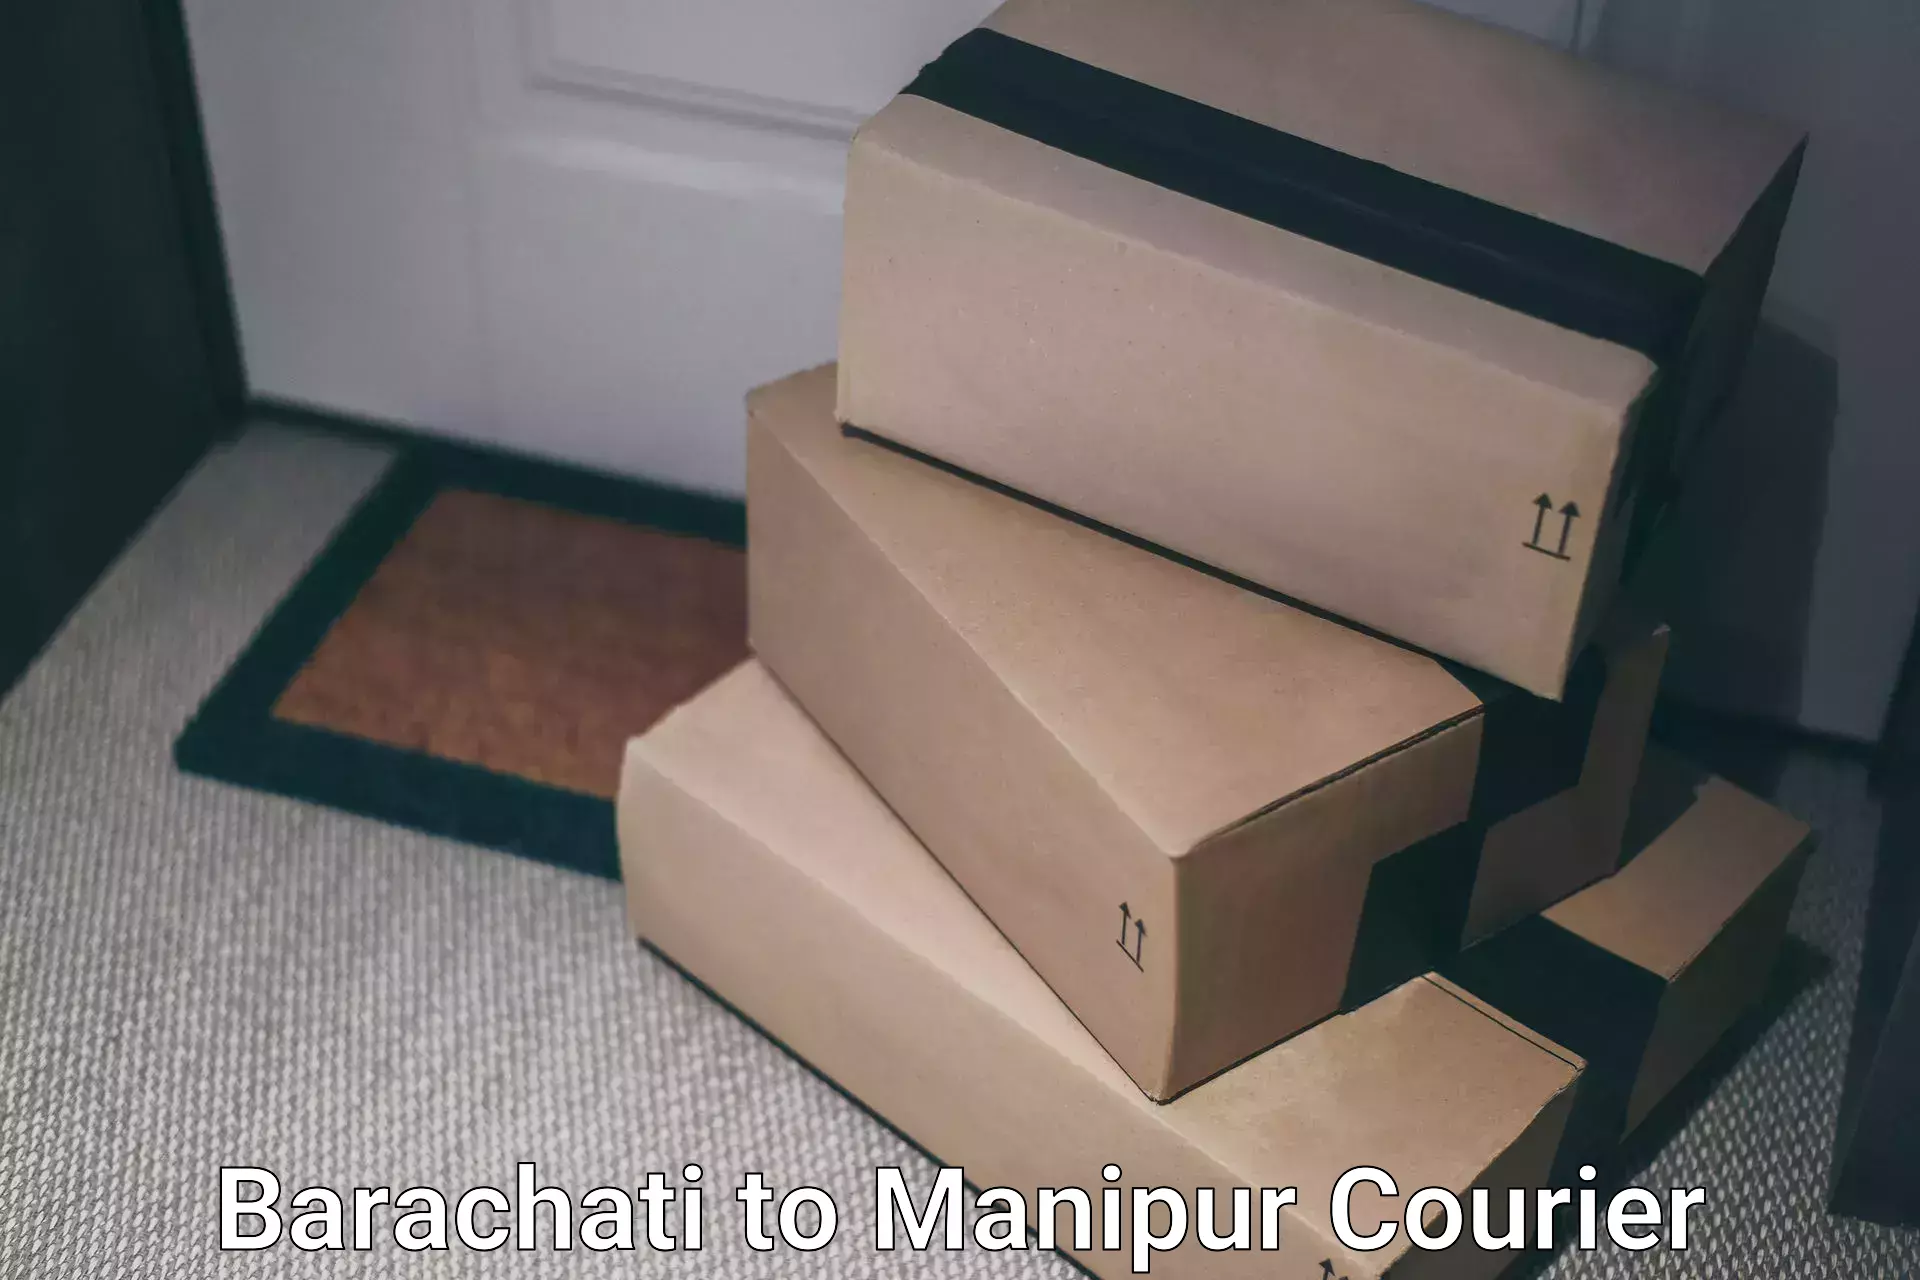 Courier service partnerships Barachati to Chandel